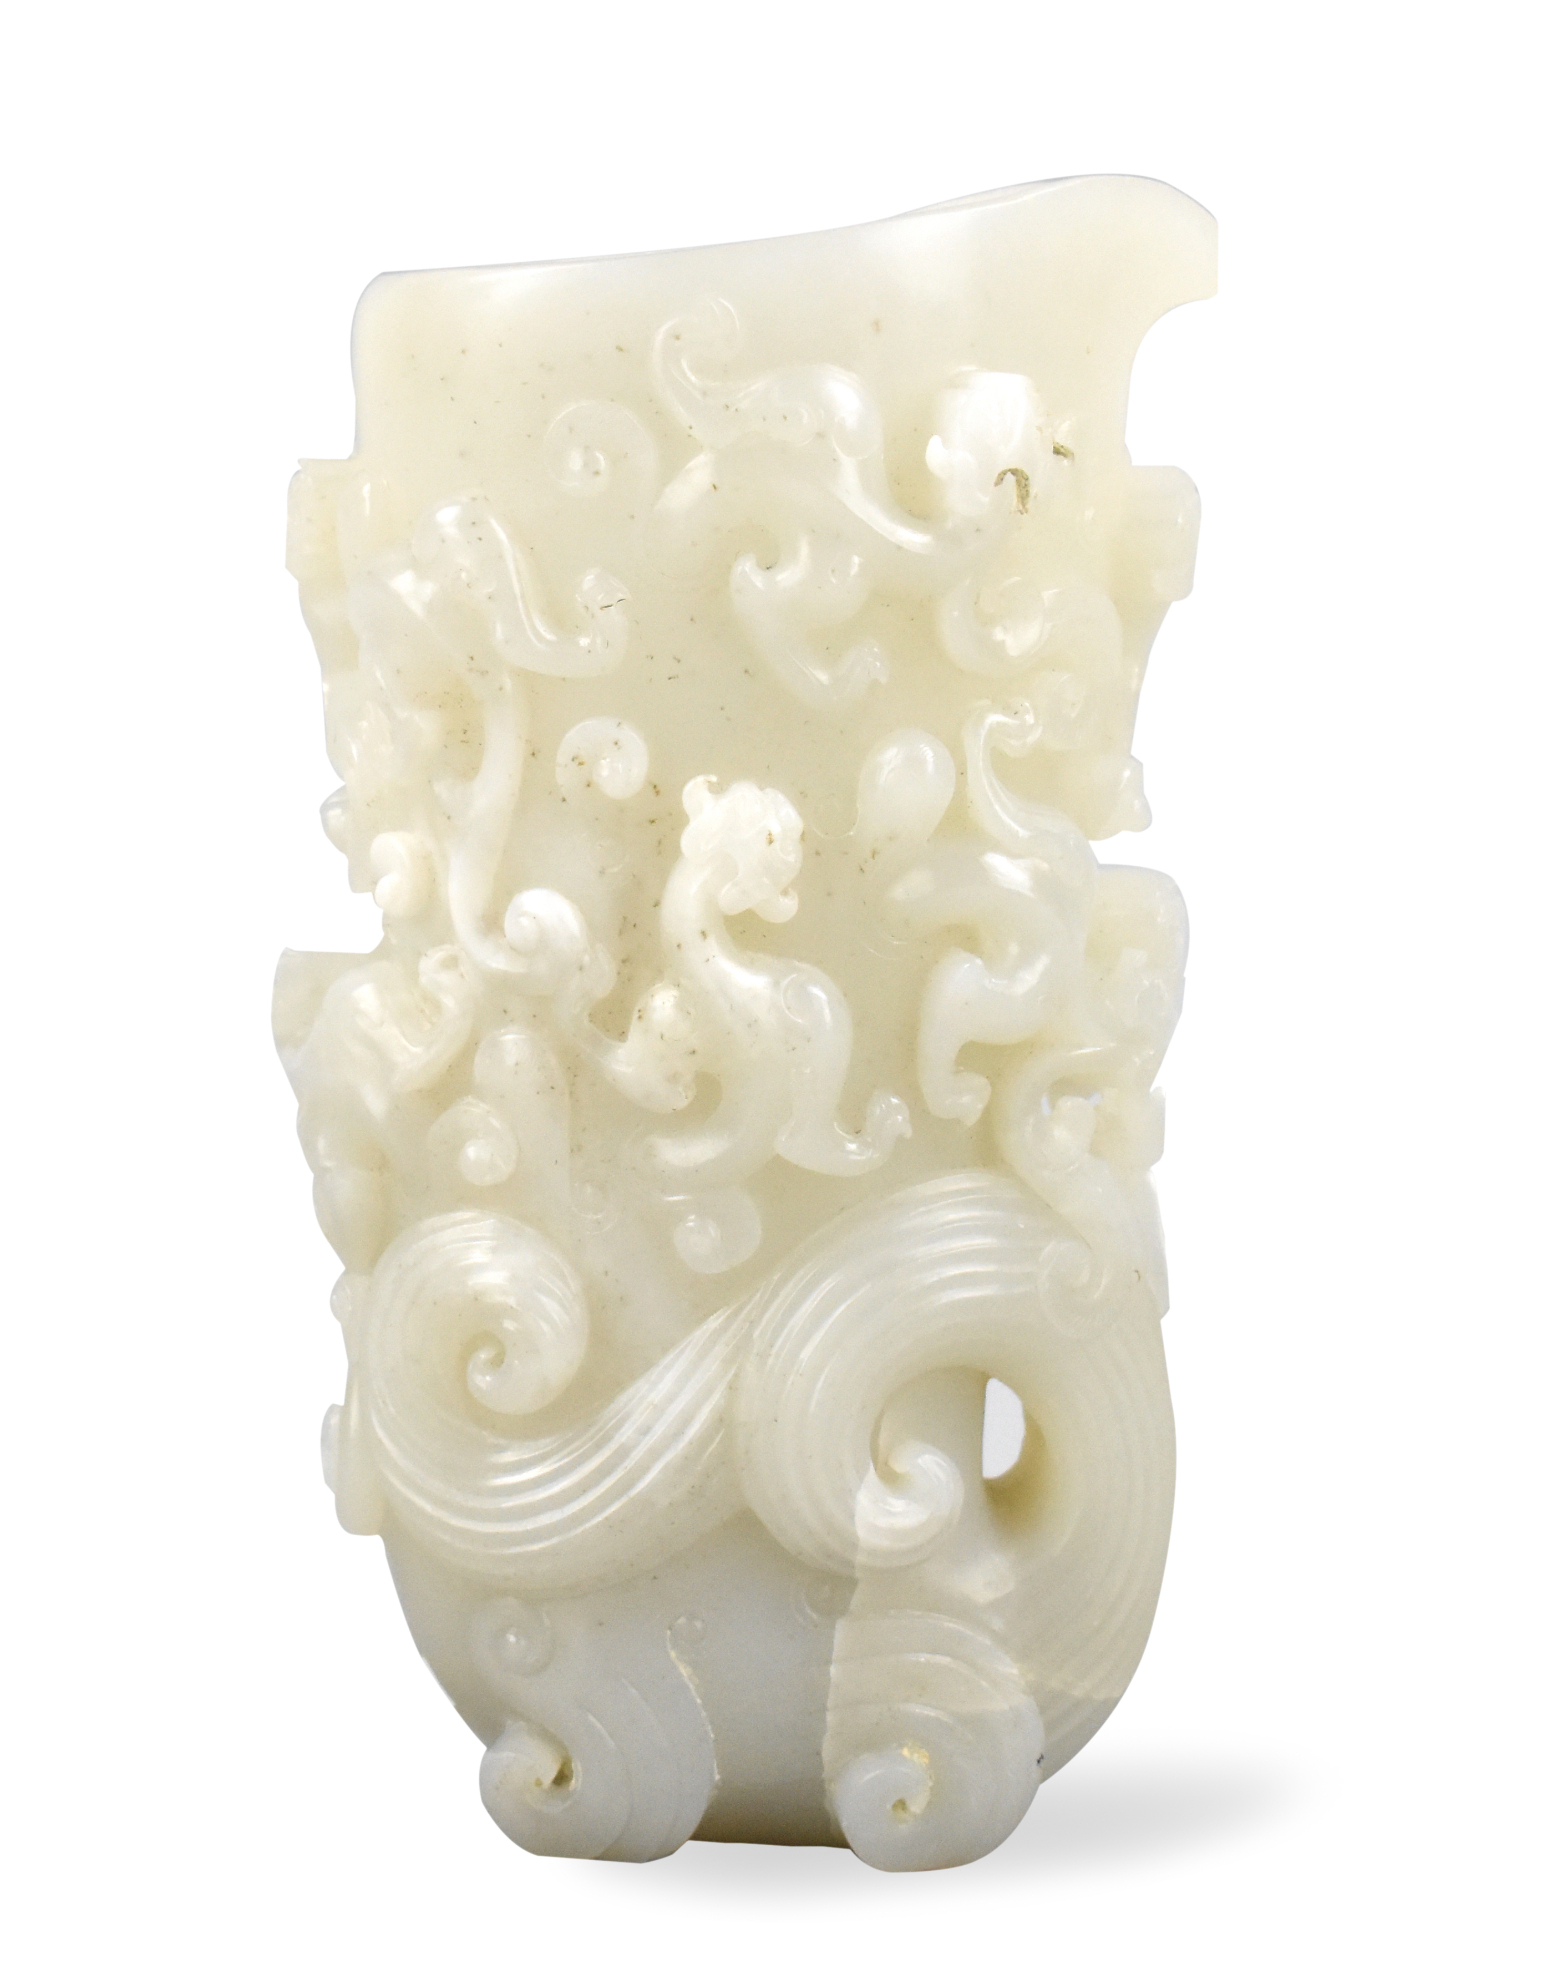 CHINESE ARCHAISTIC WHITE JADE CARVING 339e82